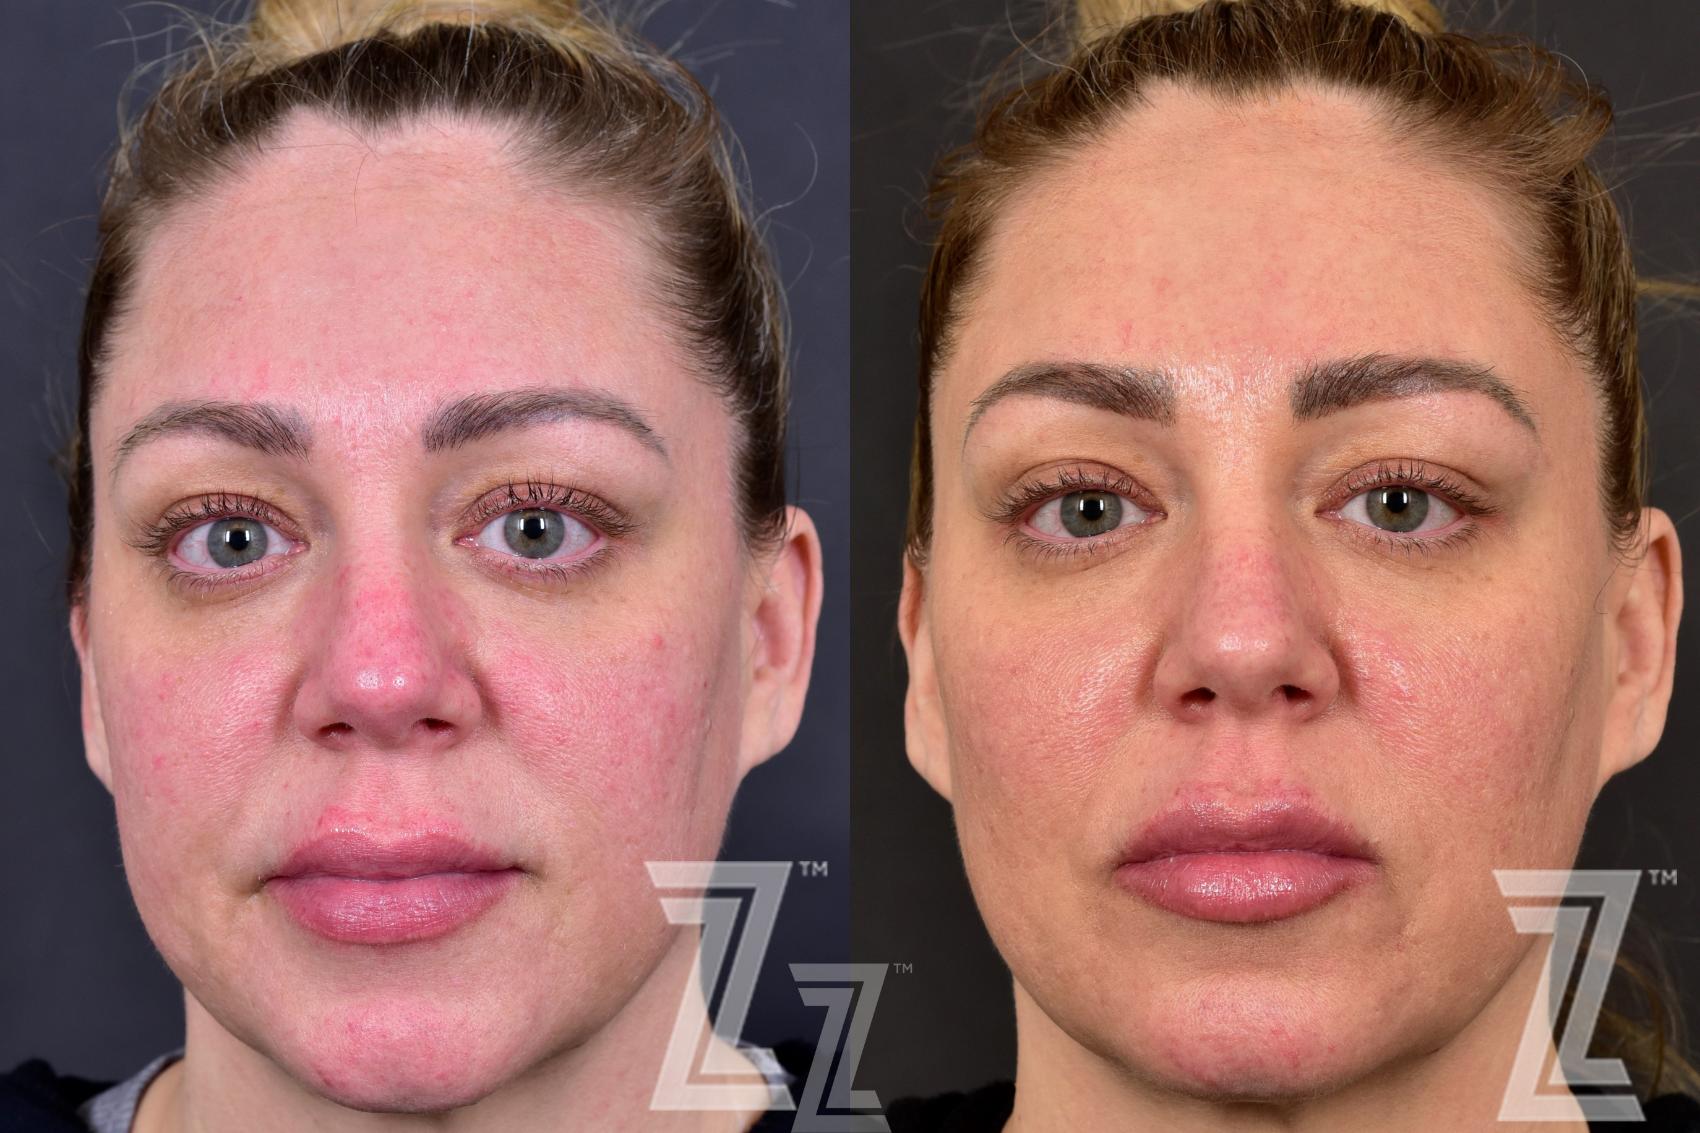 BBL Before & After Photo | Austin, TX | The Piazza Center for Plastic Surgery & Advanced Skin Care